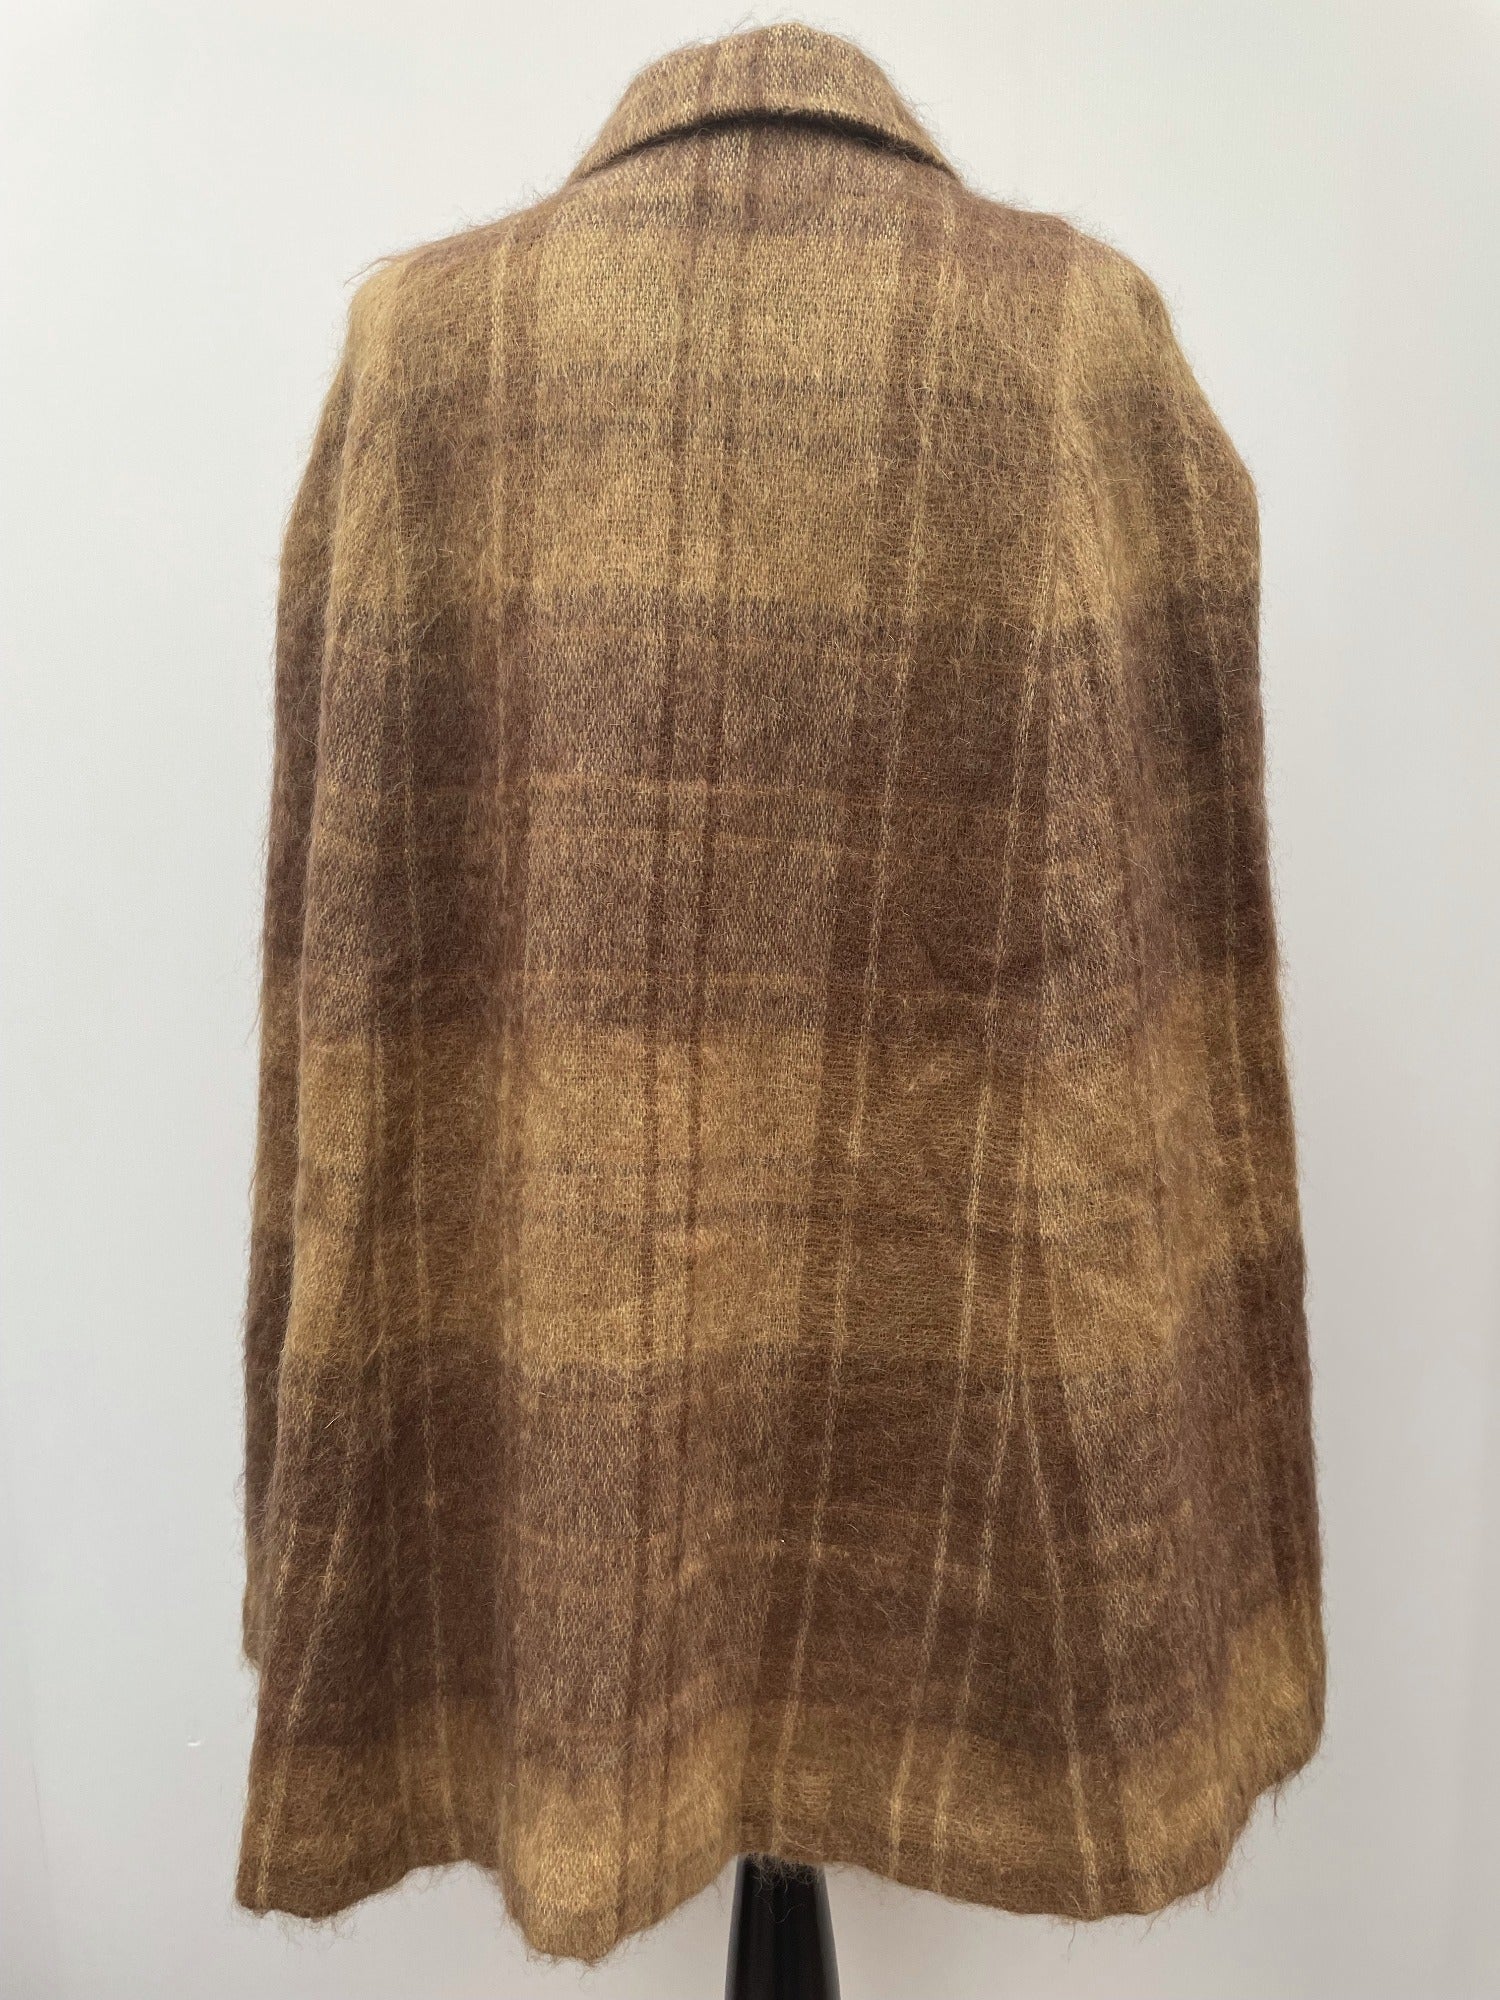 Wool Blend  wool  womens  vintage  Urban Village Vintage  urban village  pockets  patterned  pattern  One Size  mohair  front pockets  collared  collar  button  brown  Andrew Stuart